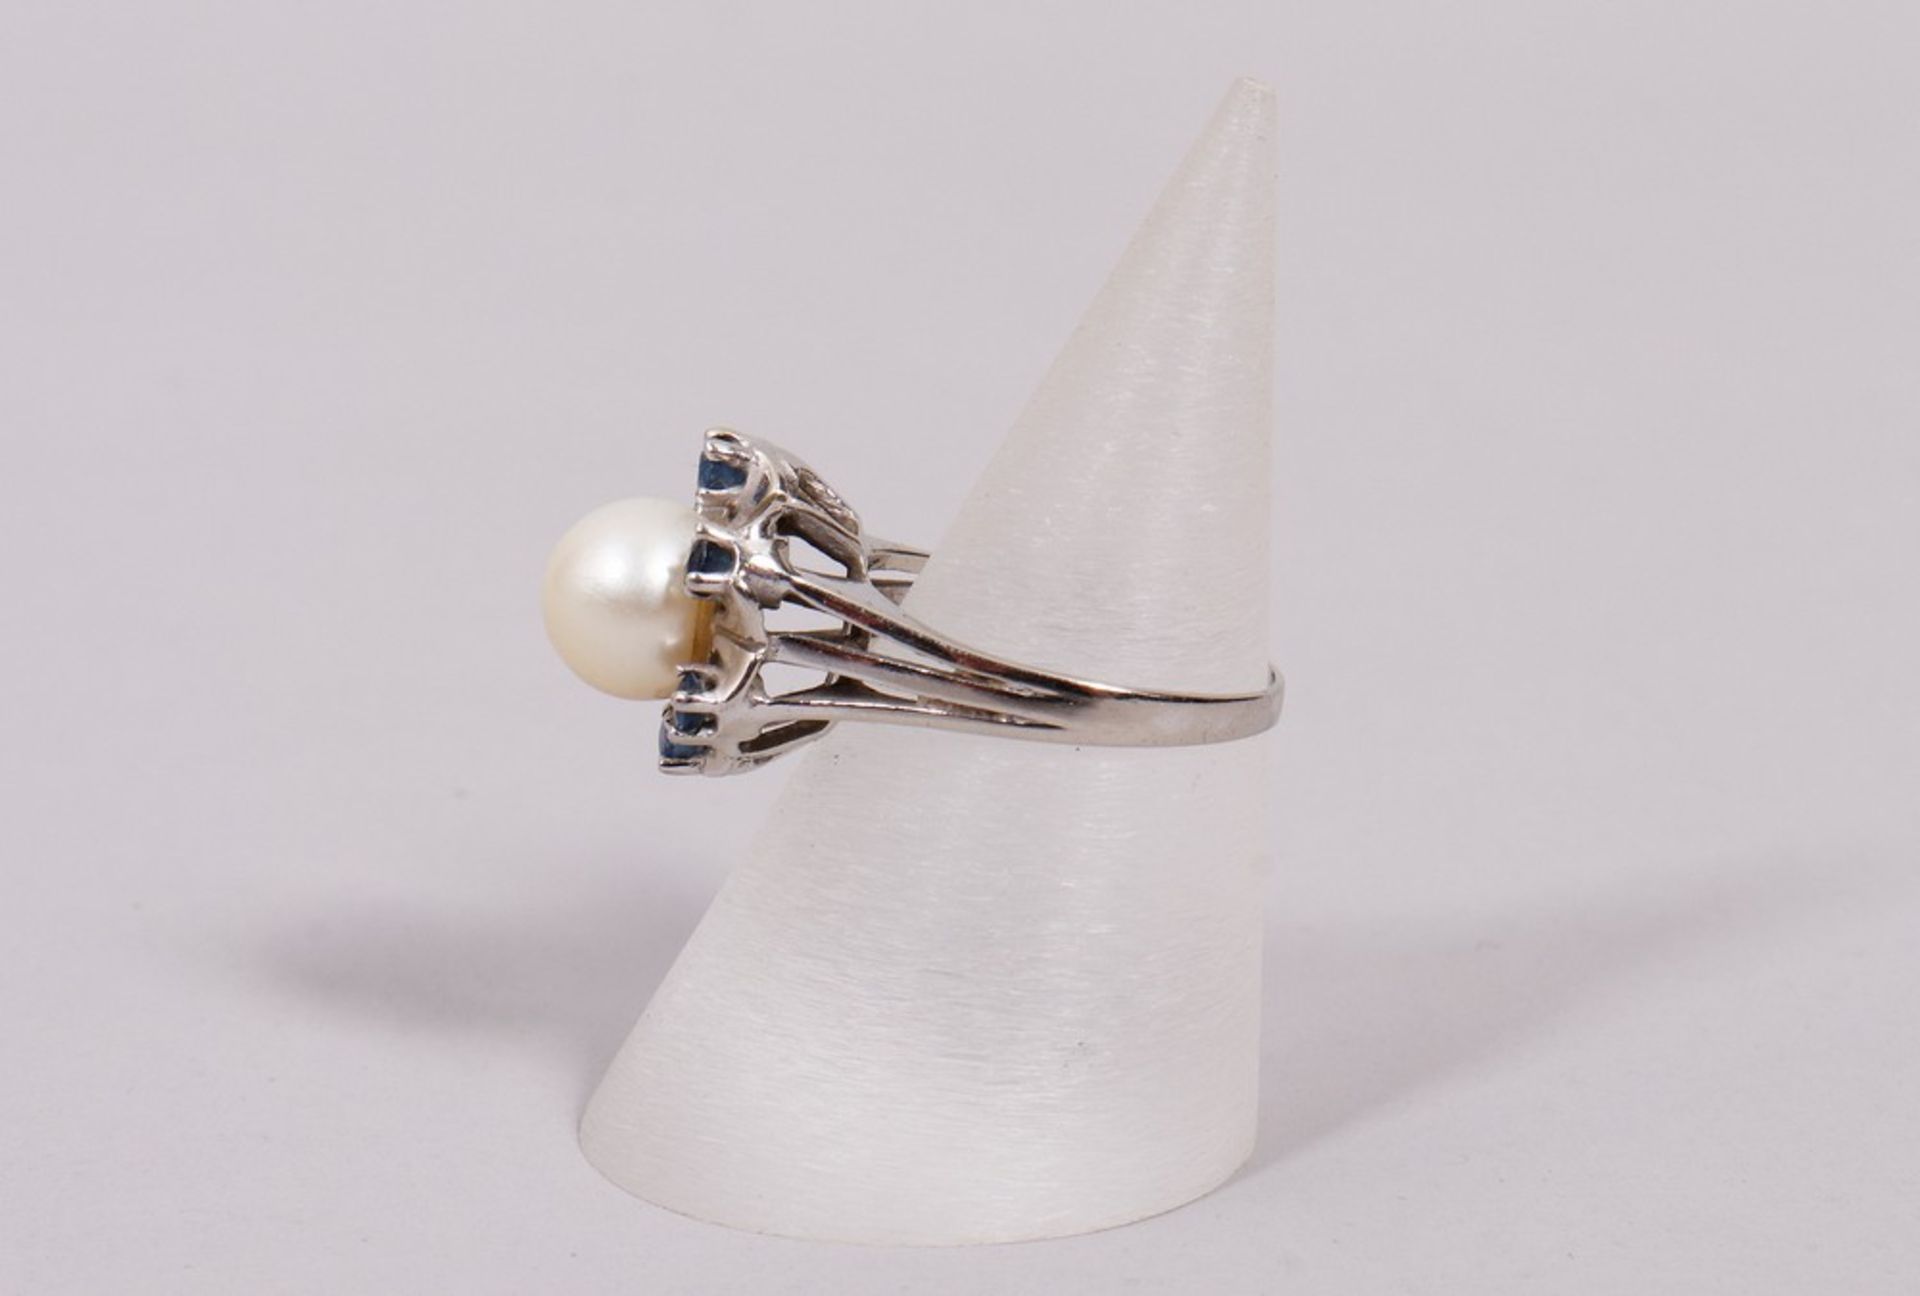 Pearl ring, 585 white gold, 20th C. - Image 2 of 5